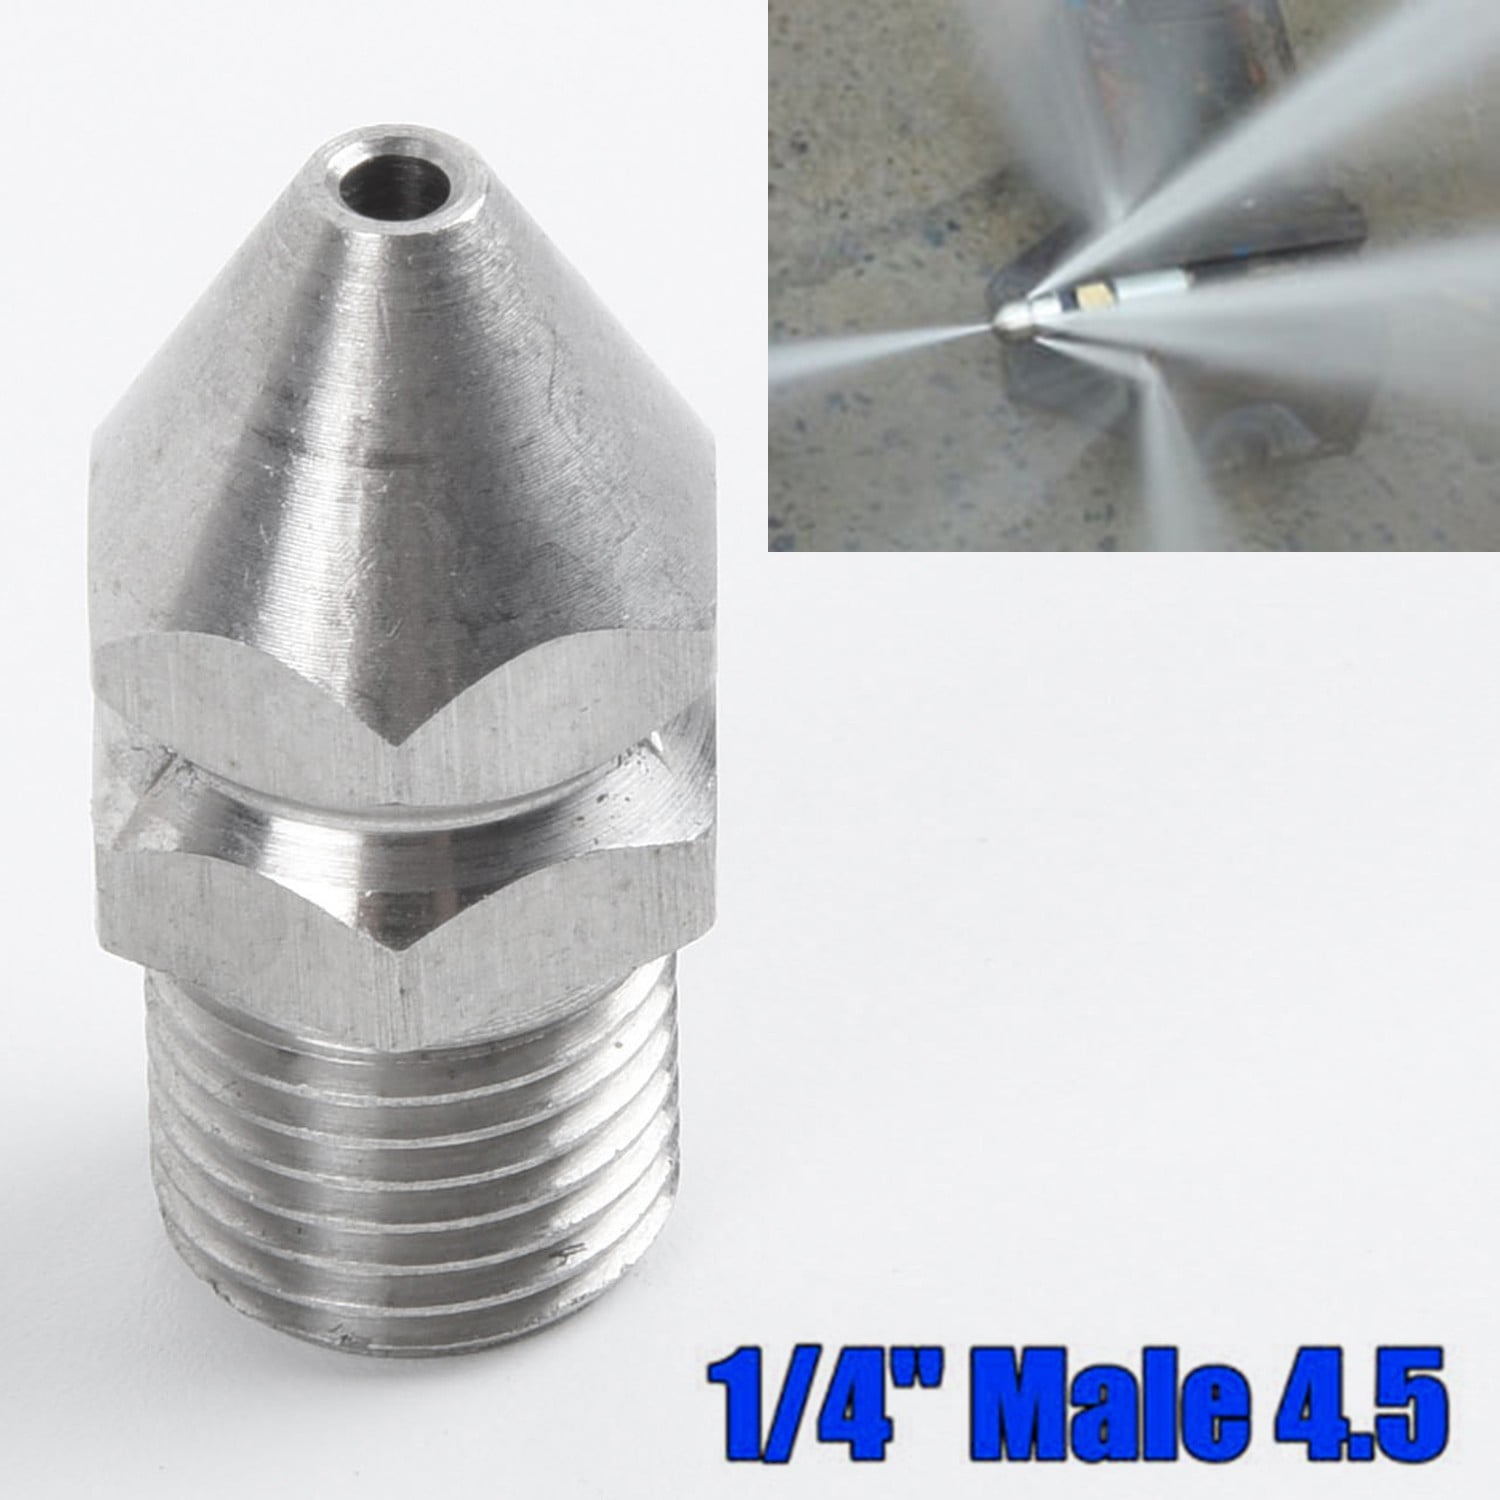 Pressure Washer Drain Sewer Cleaning Pipe Jetter Rotary Nozzle B:Round Head 